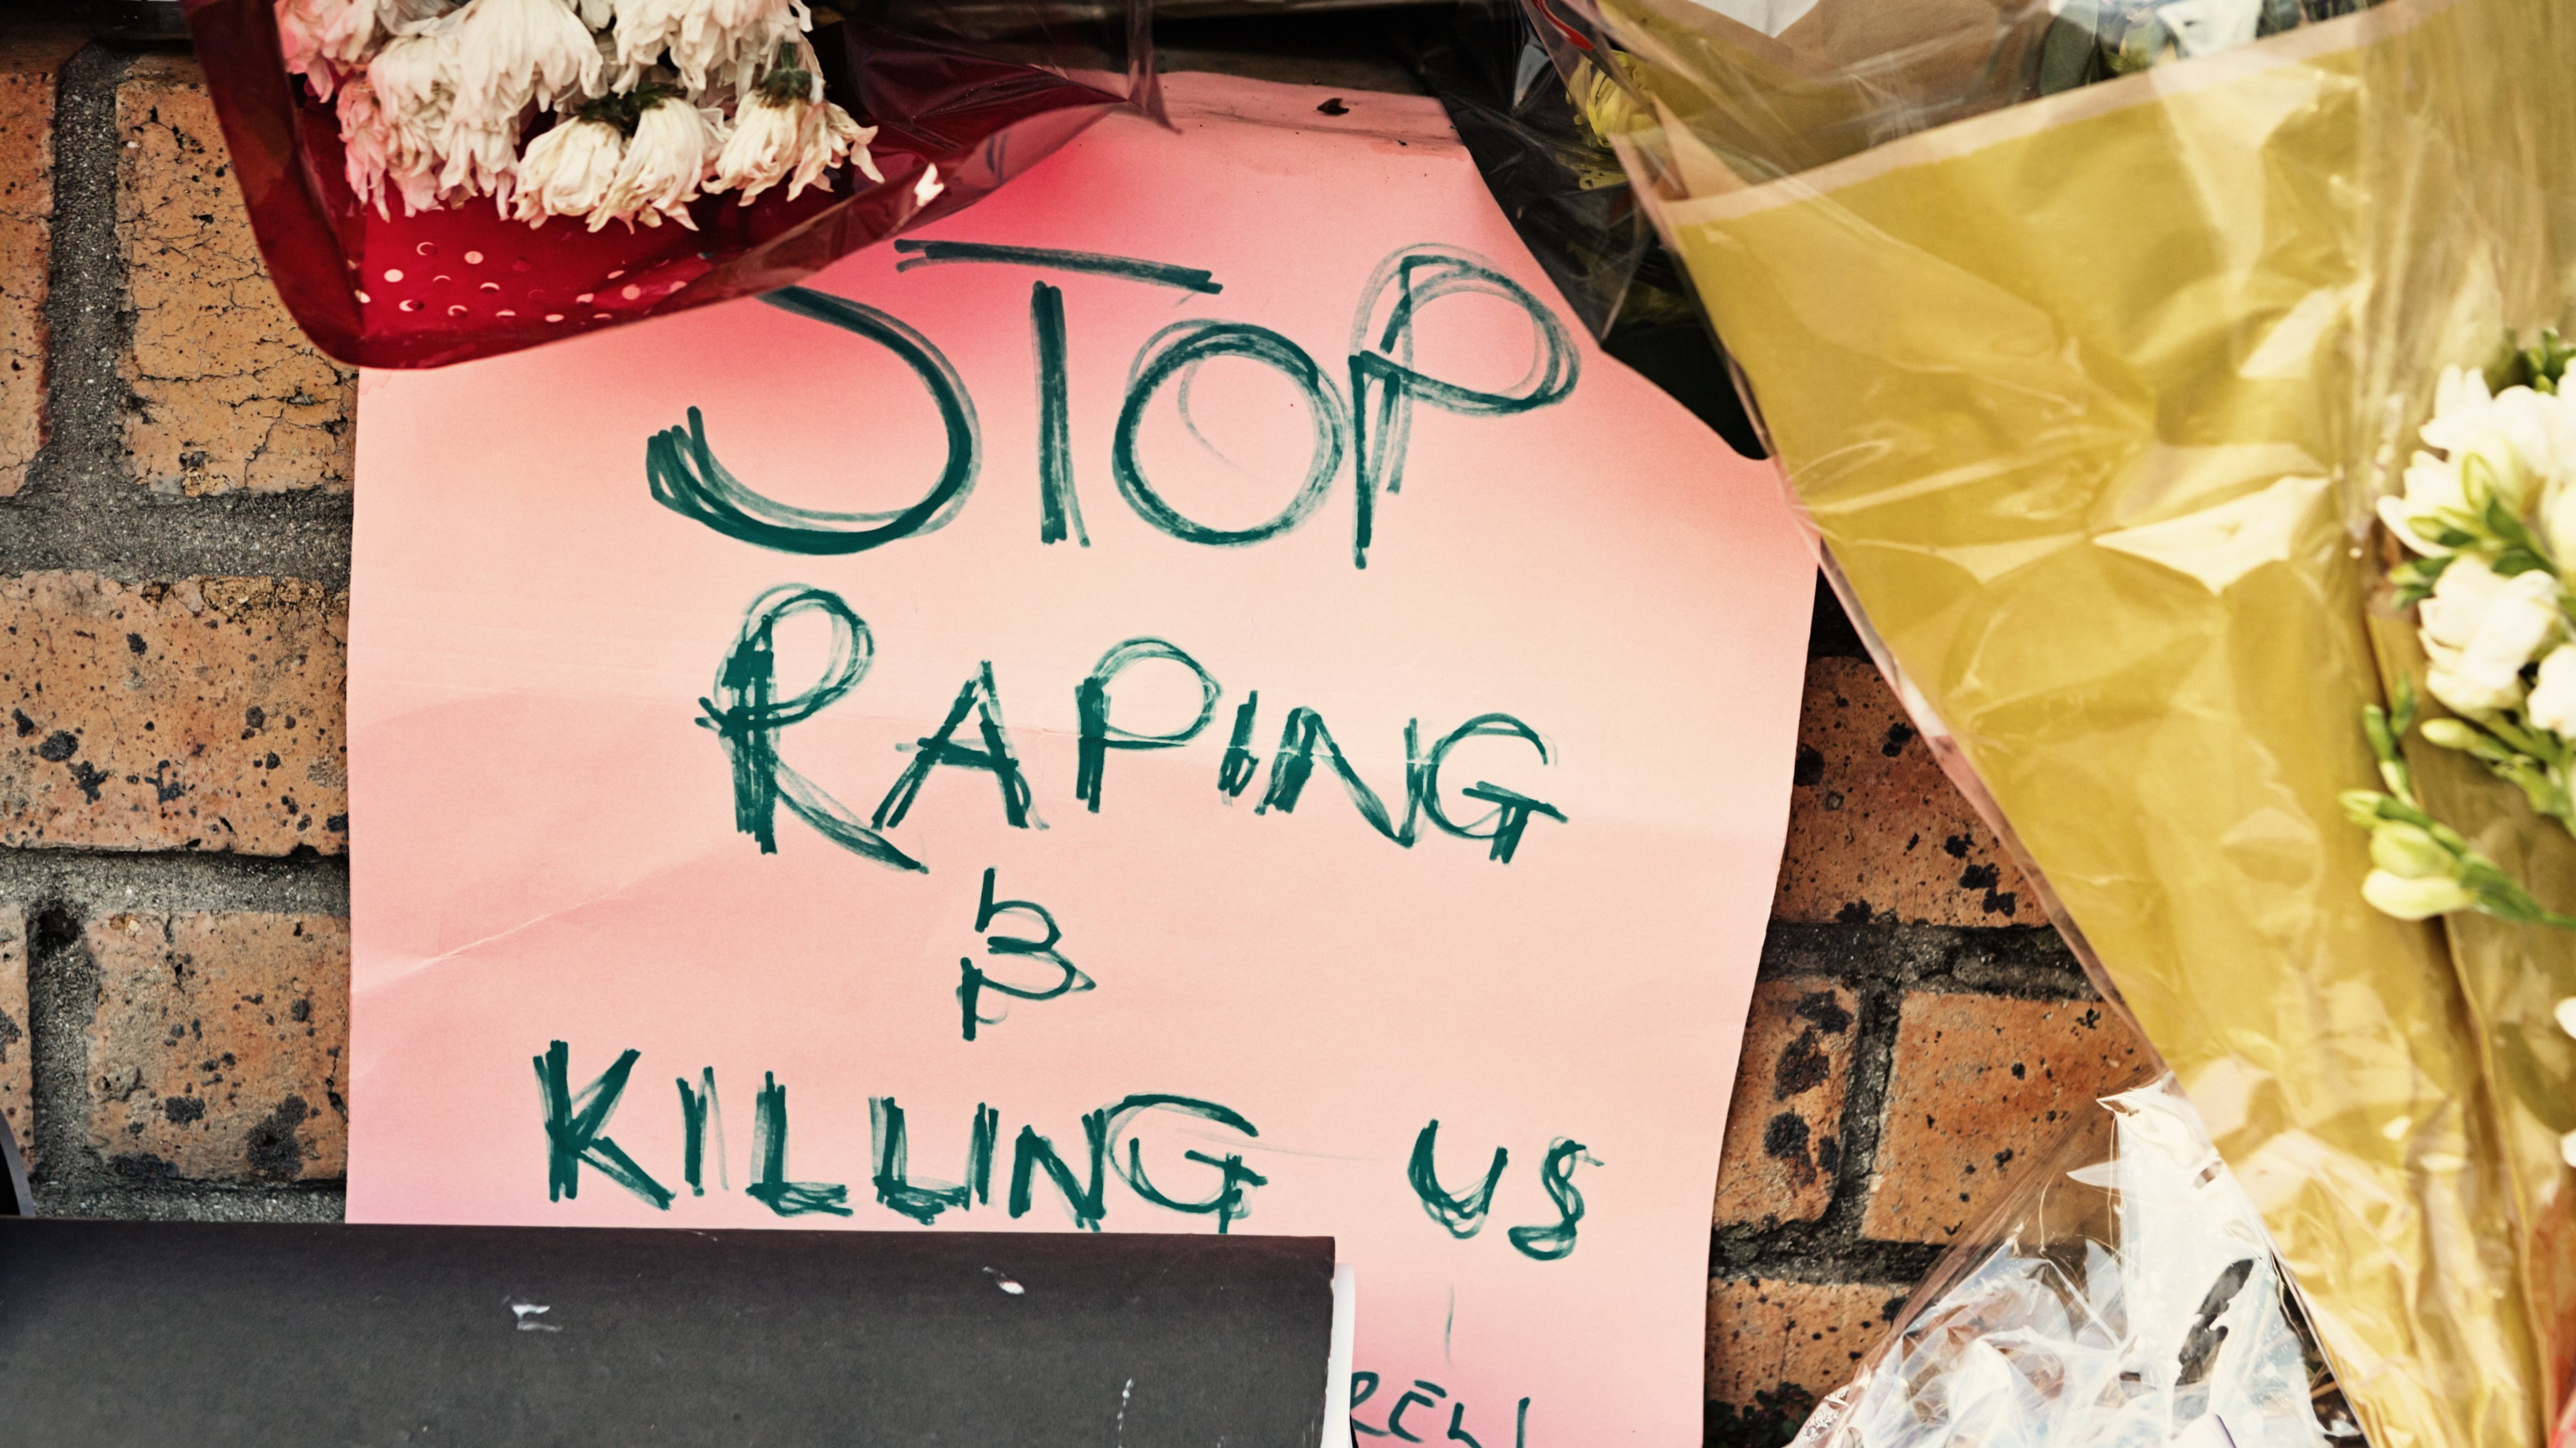 Sign left as a protest against gender violence at the scene of a rape and murder in Cape Town, South Africa